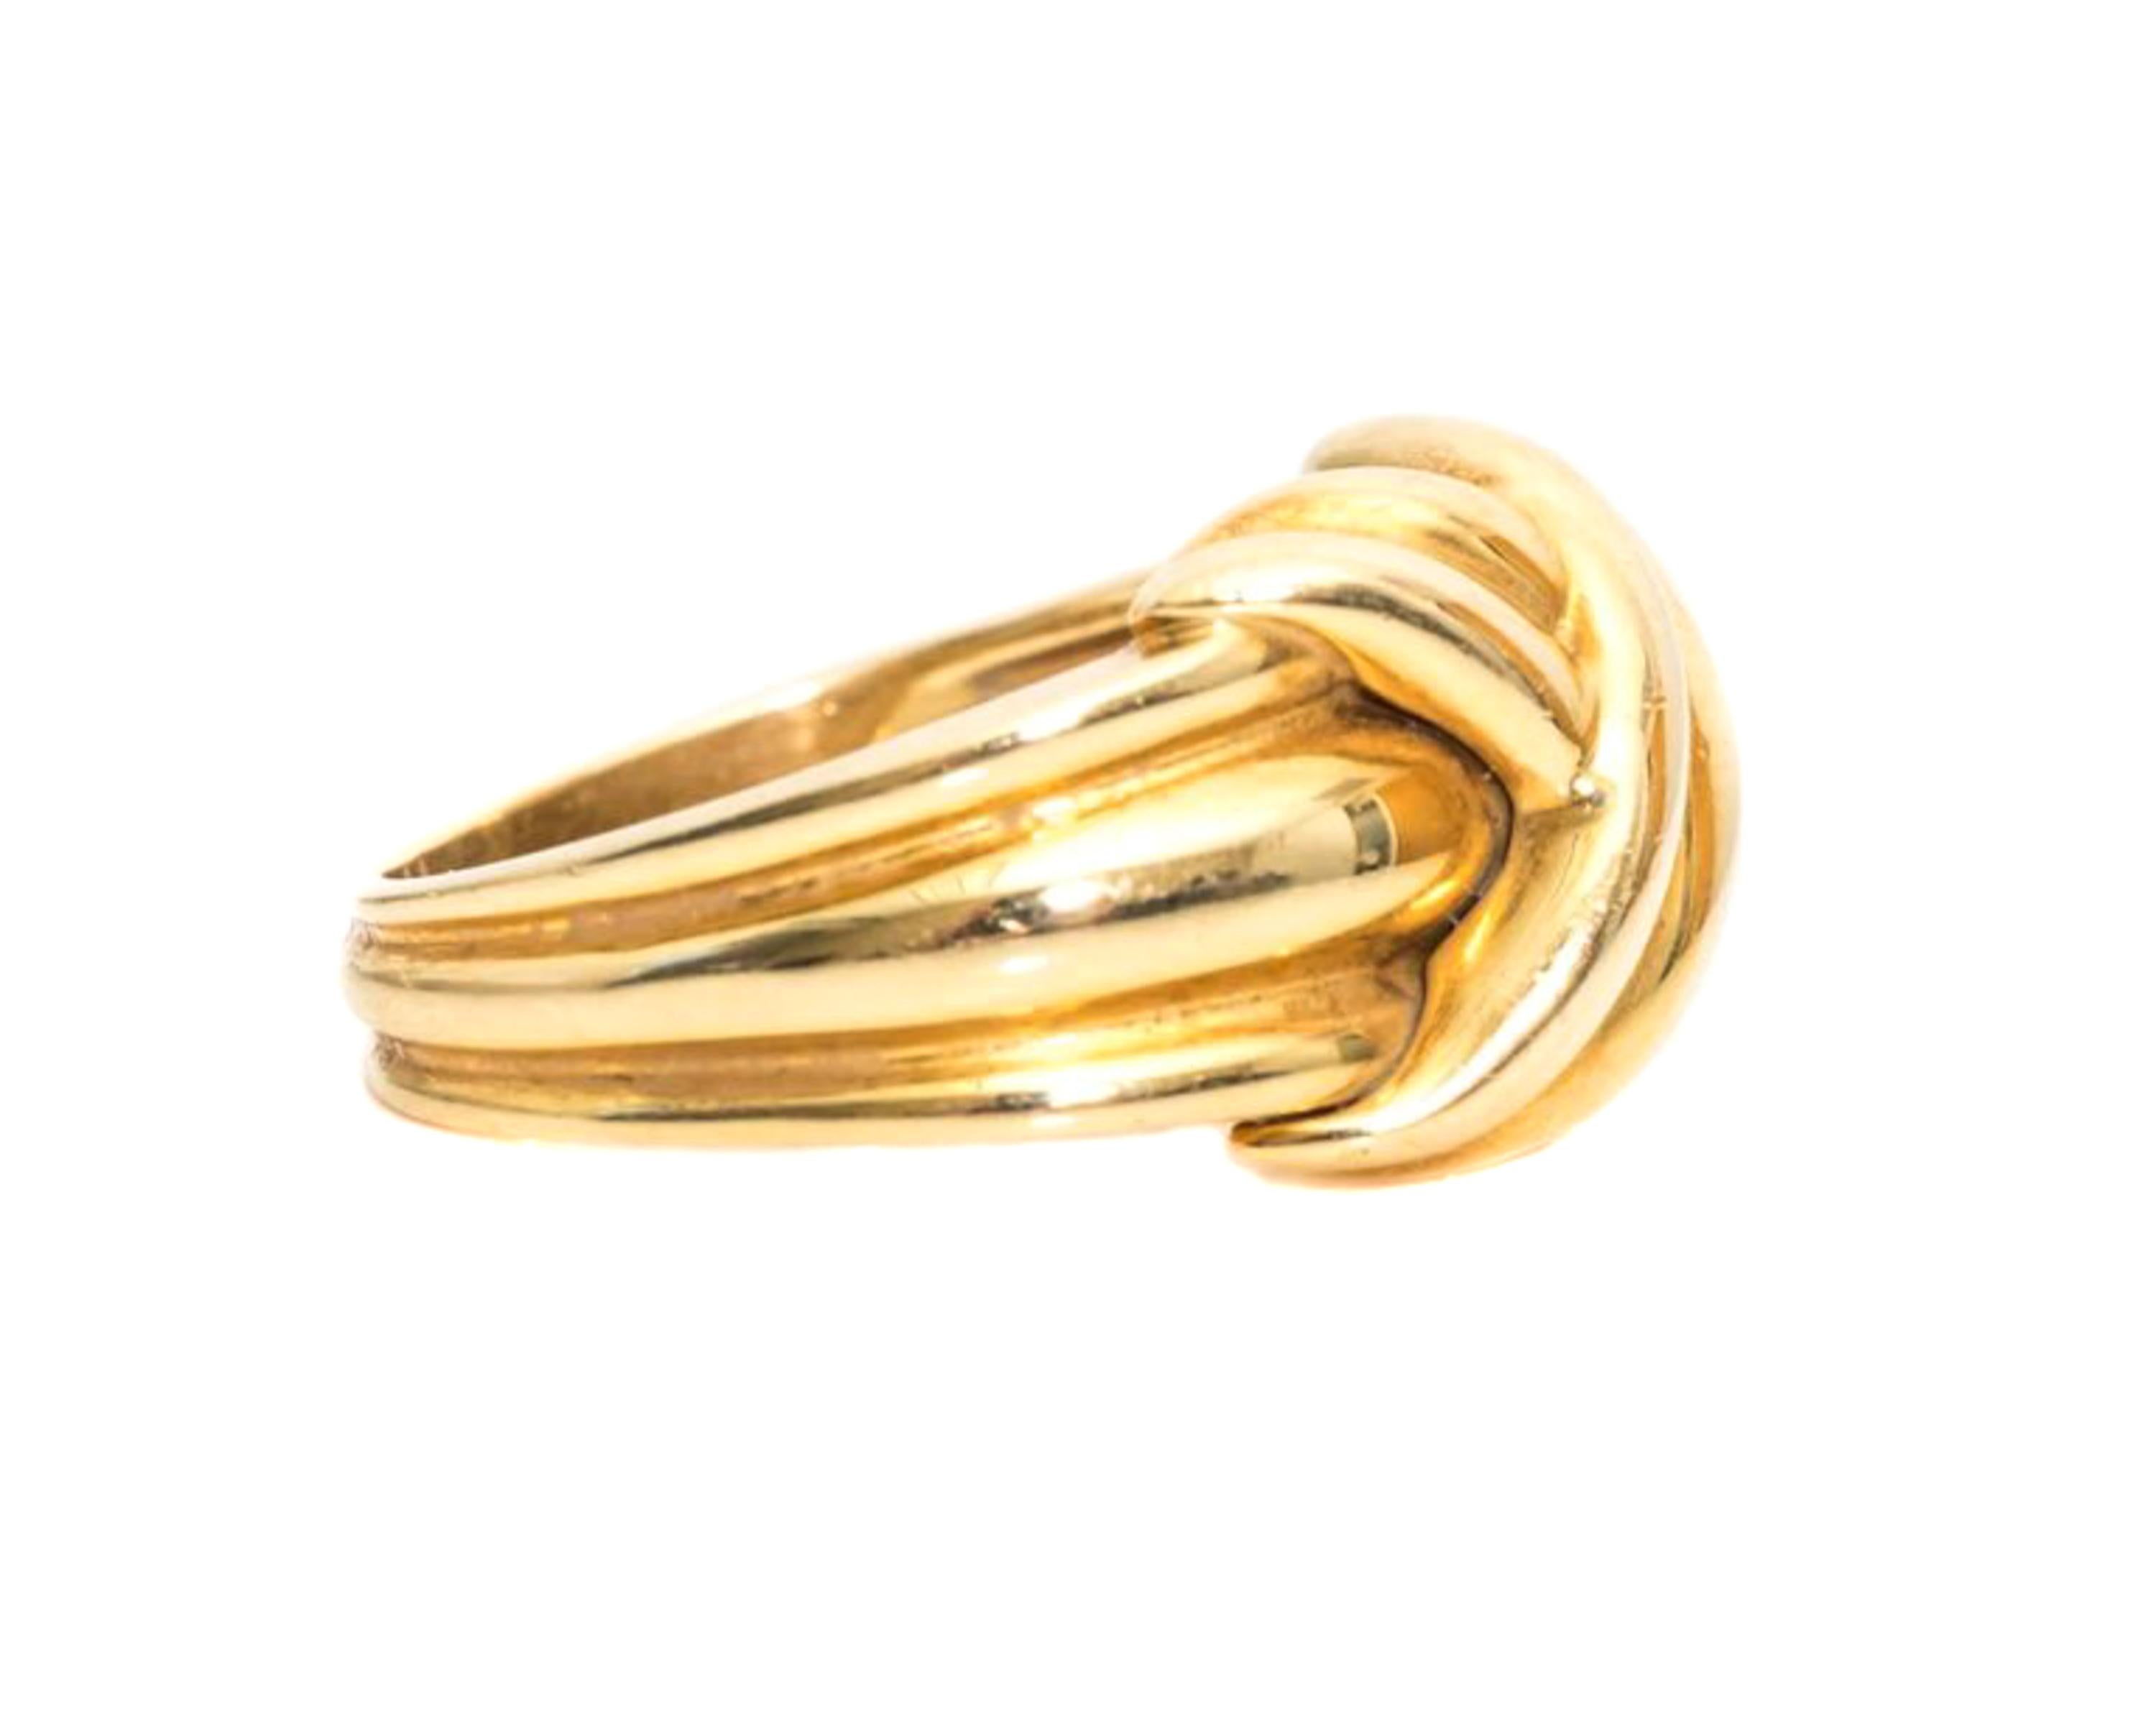 Item Description: Retired 1990s Tiffany and Co. Knot Ring crafted in 18 Karat Yellow Gold

Features: 
an X shaped knot at the center front
3 distinct bands on the shank tapering toward the center back

Ring width tapers from 12 - 4